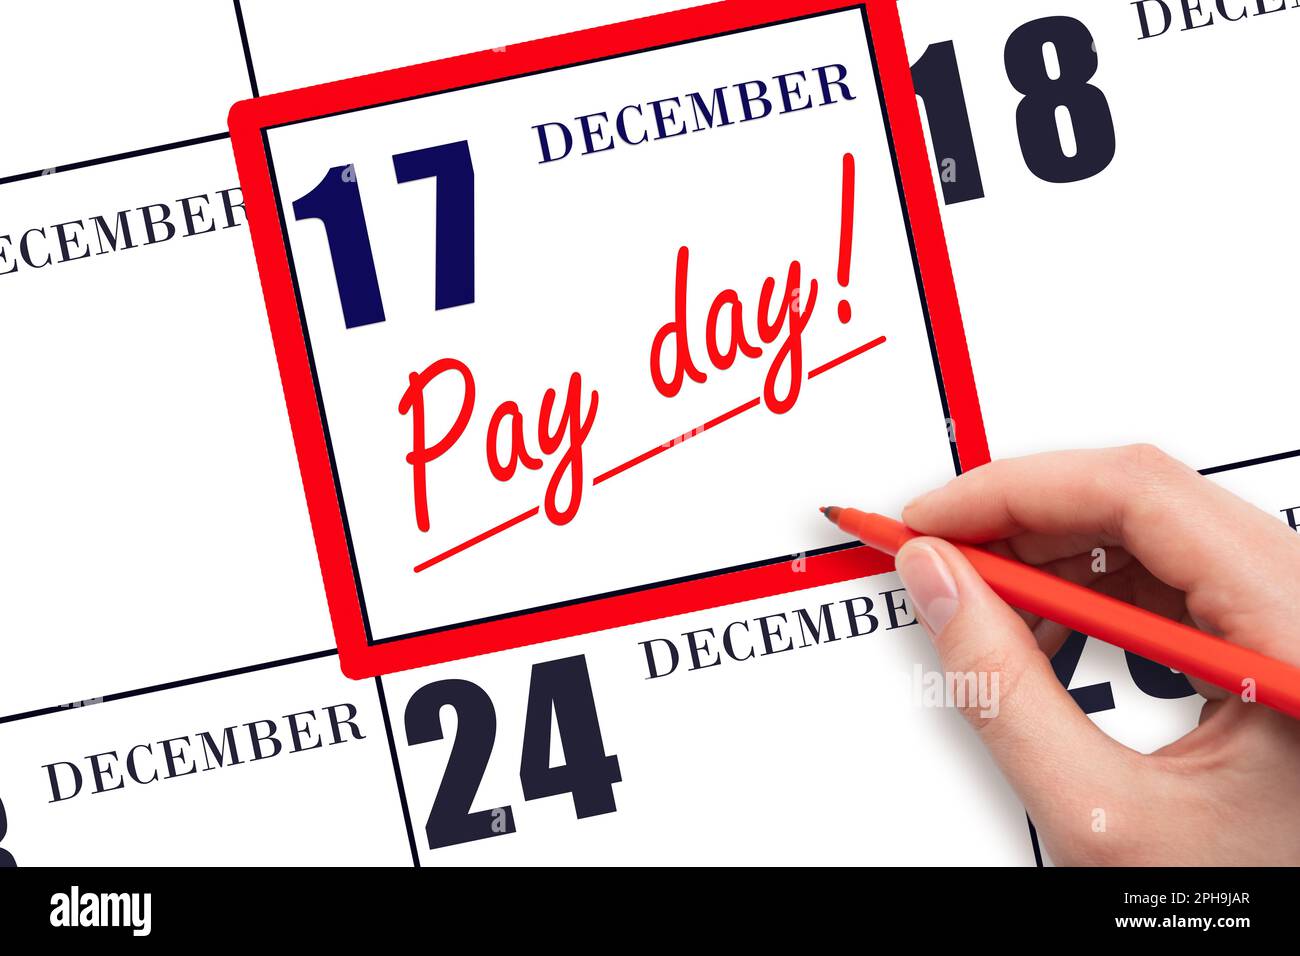 17th day of December. Hand writing text PAY DATE on calendar date December 17 and underline it. Payment due date.  Reminder concept of payment. Winter Stock Photo